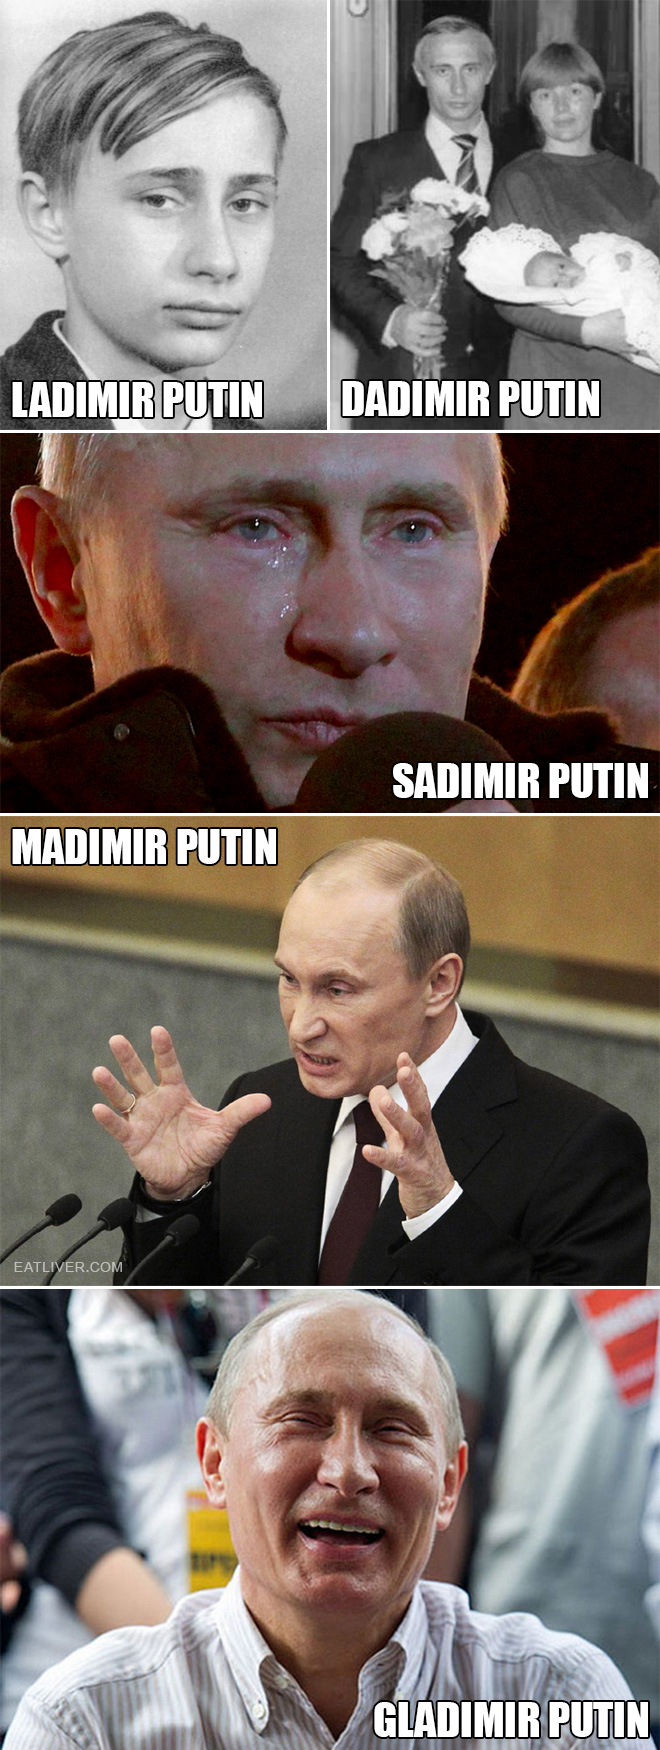 Not all Putins are the same. Have you met them all?